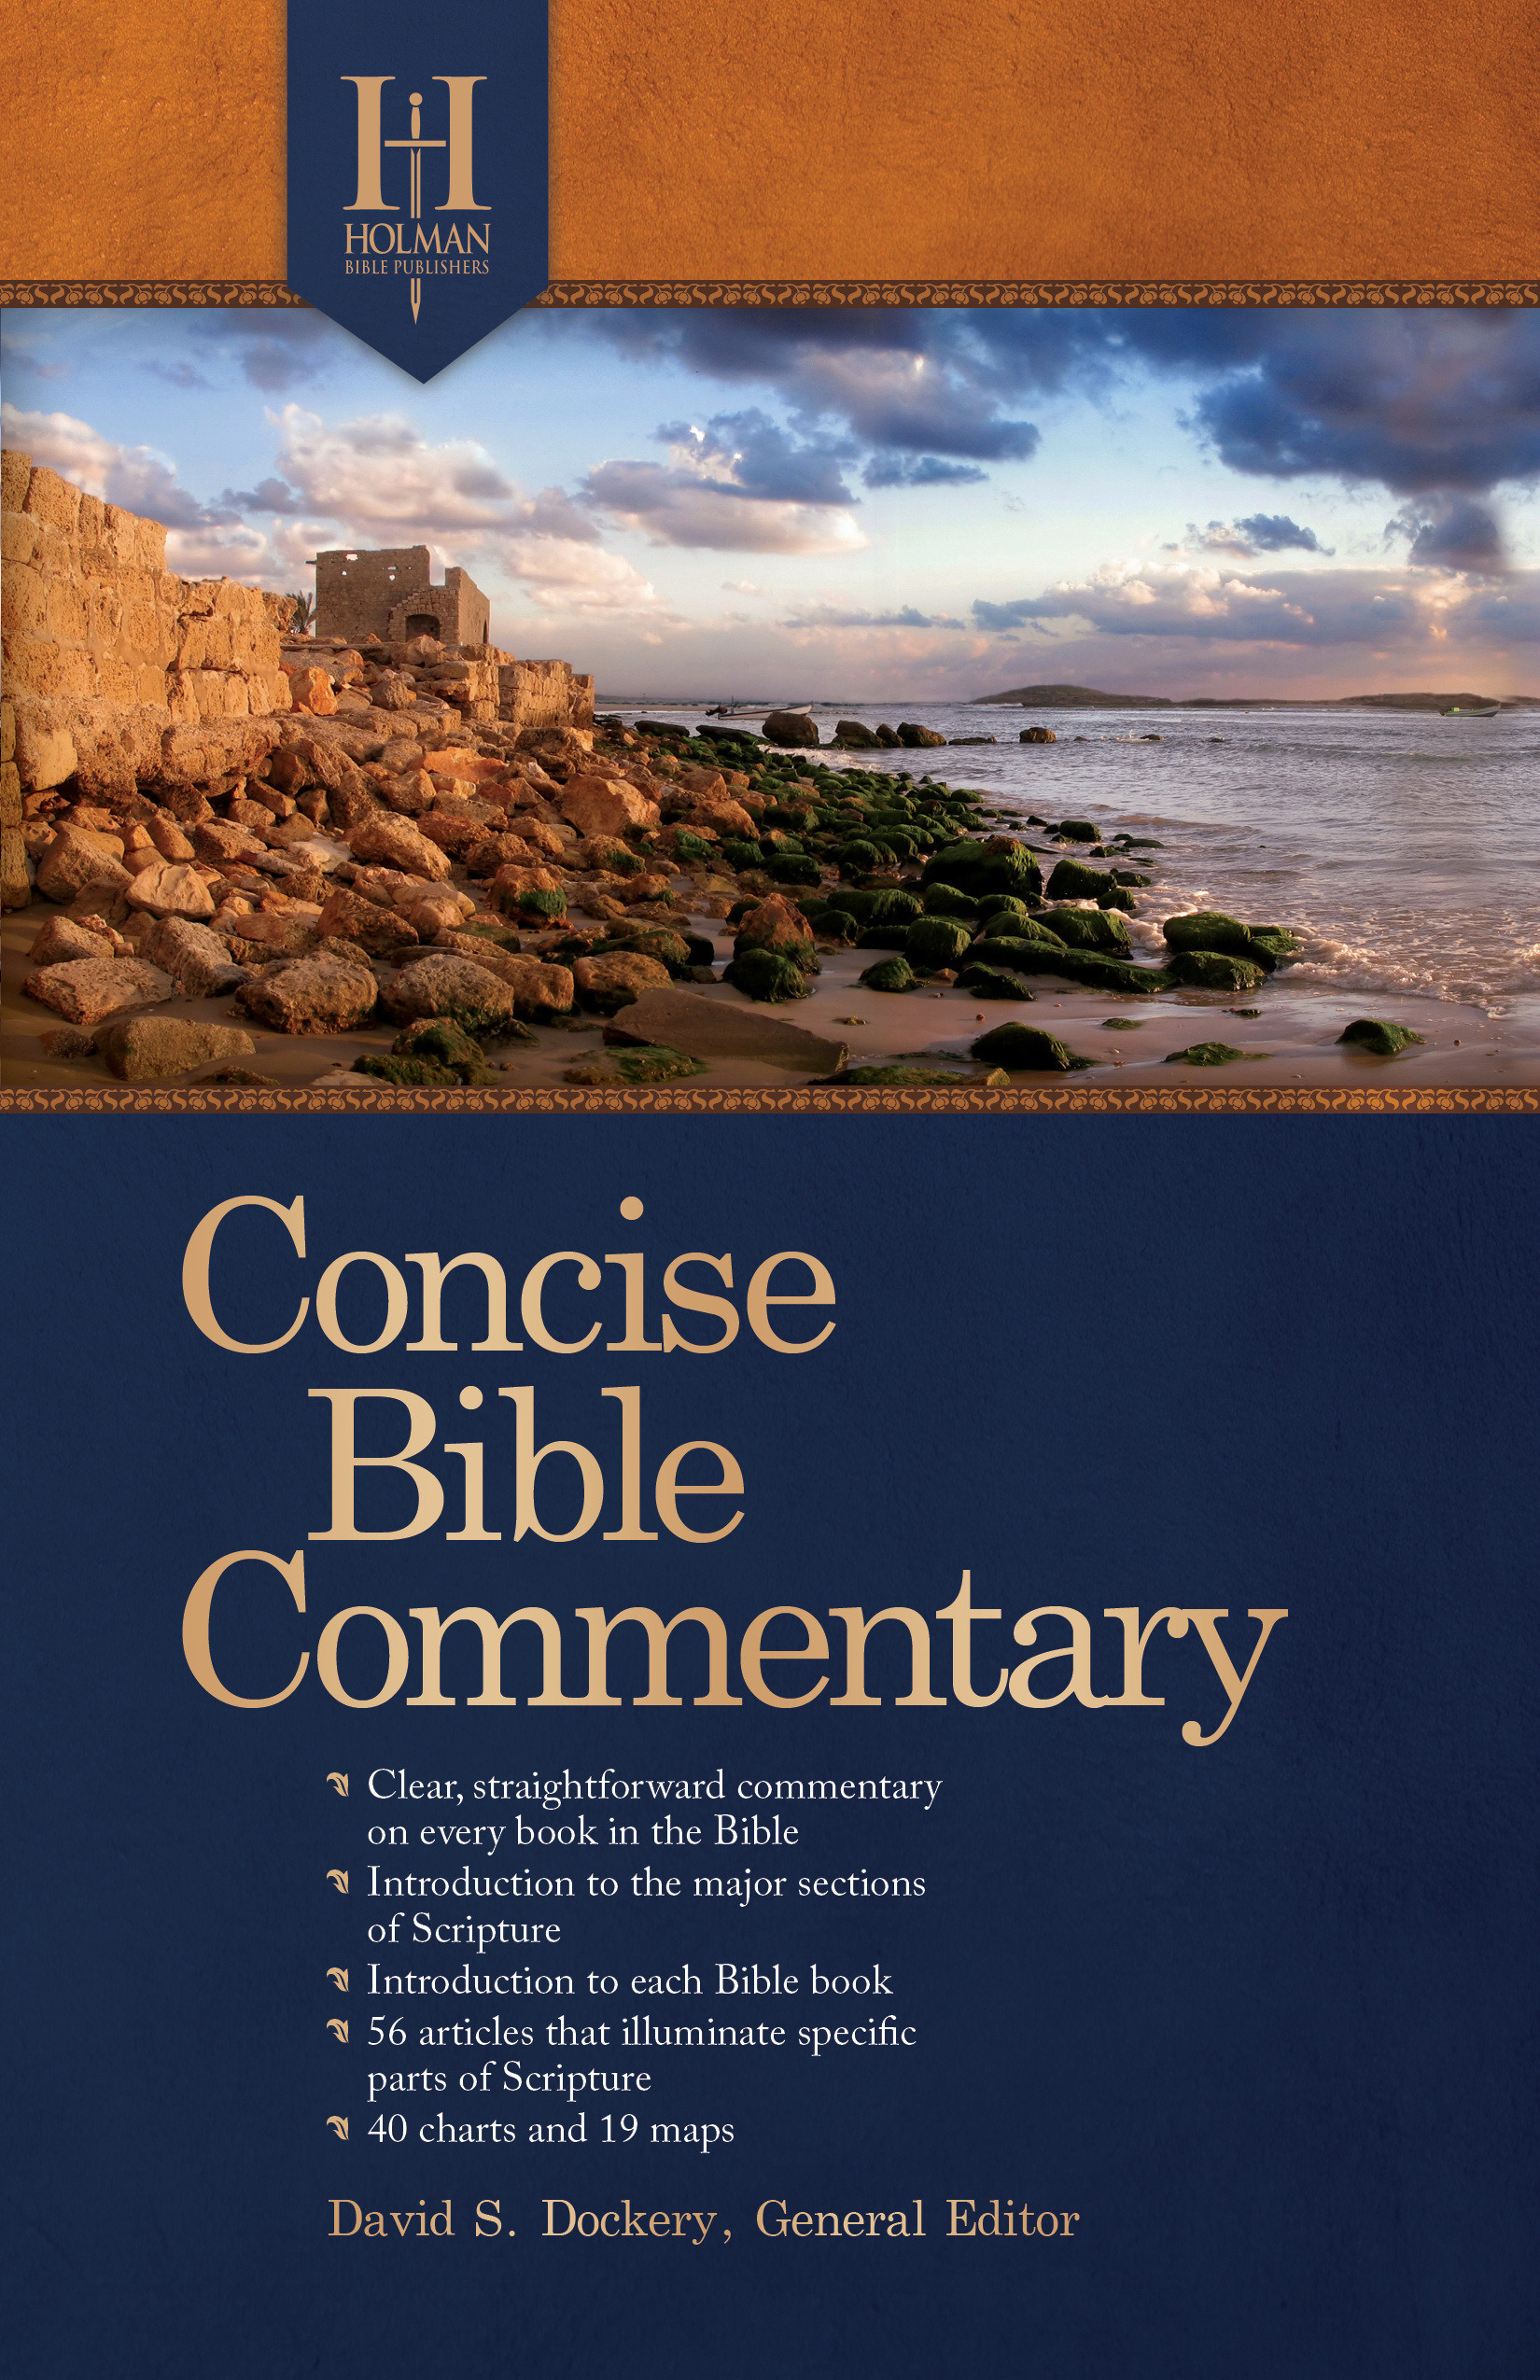 holman illustrated bible commentary download